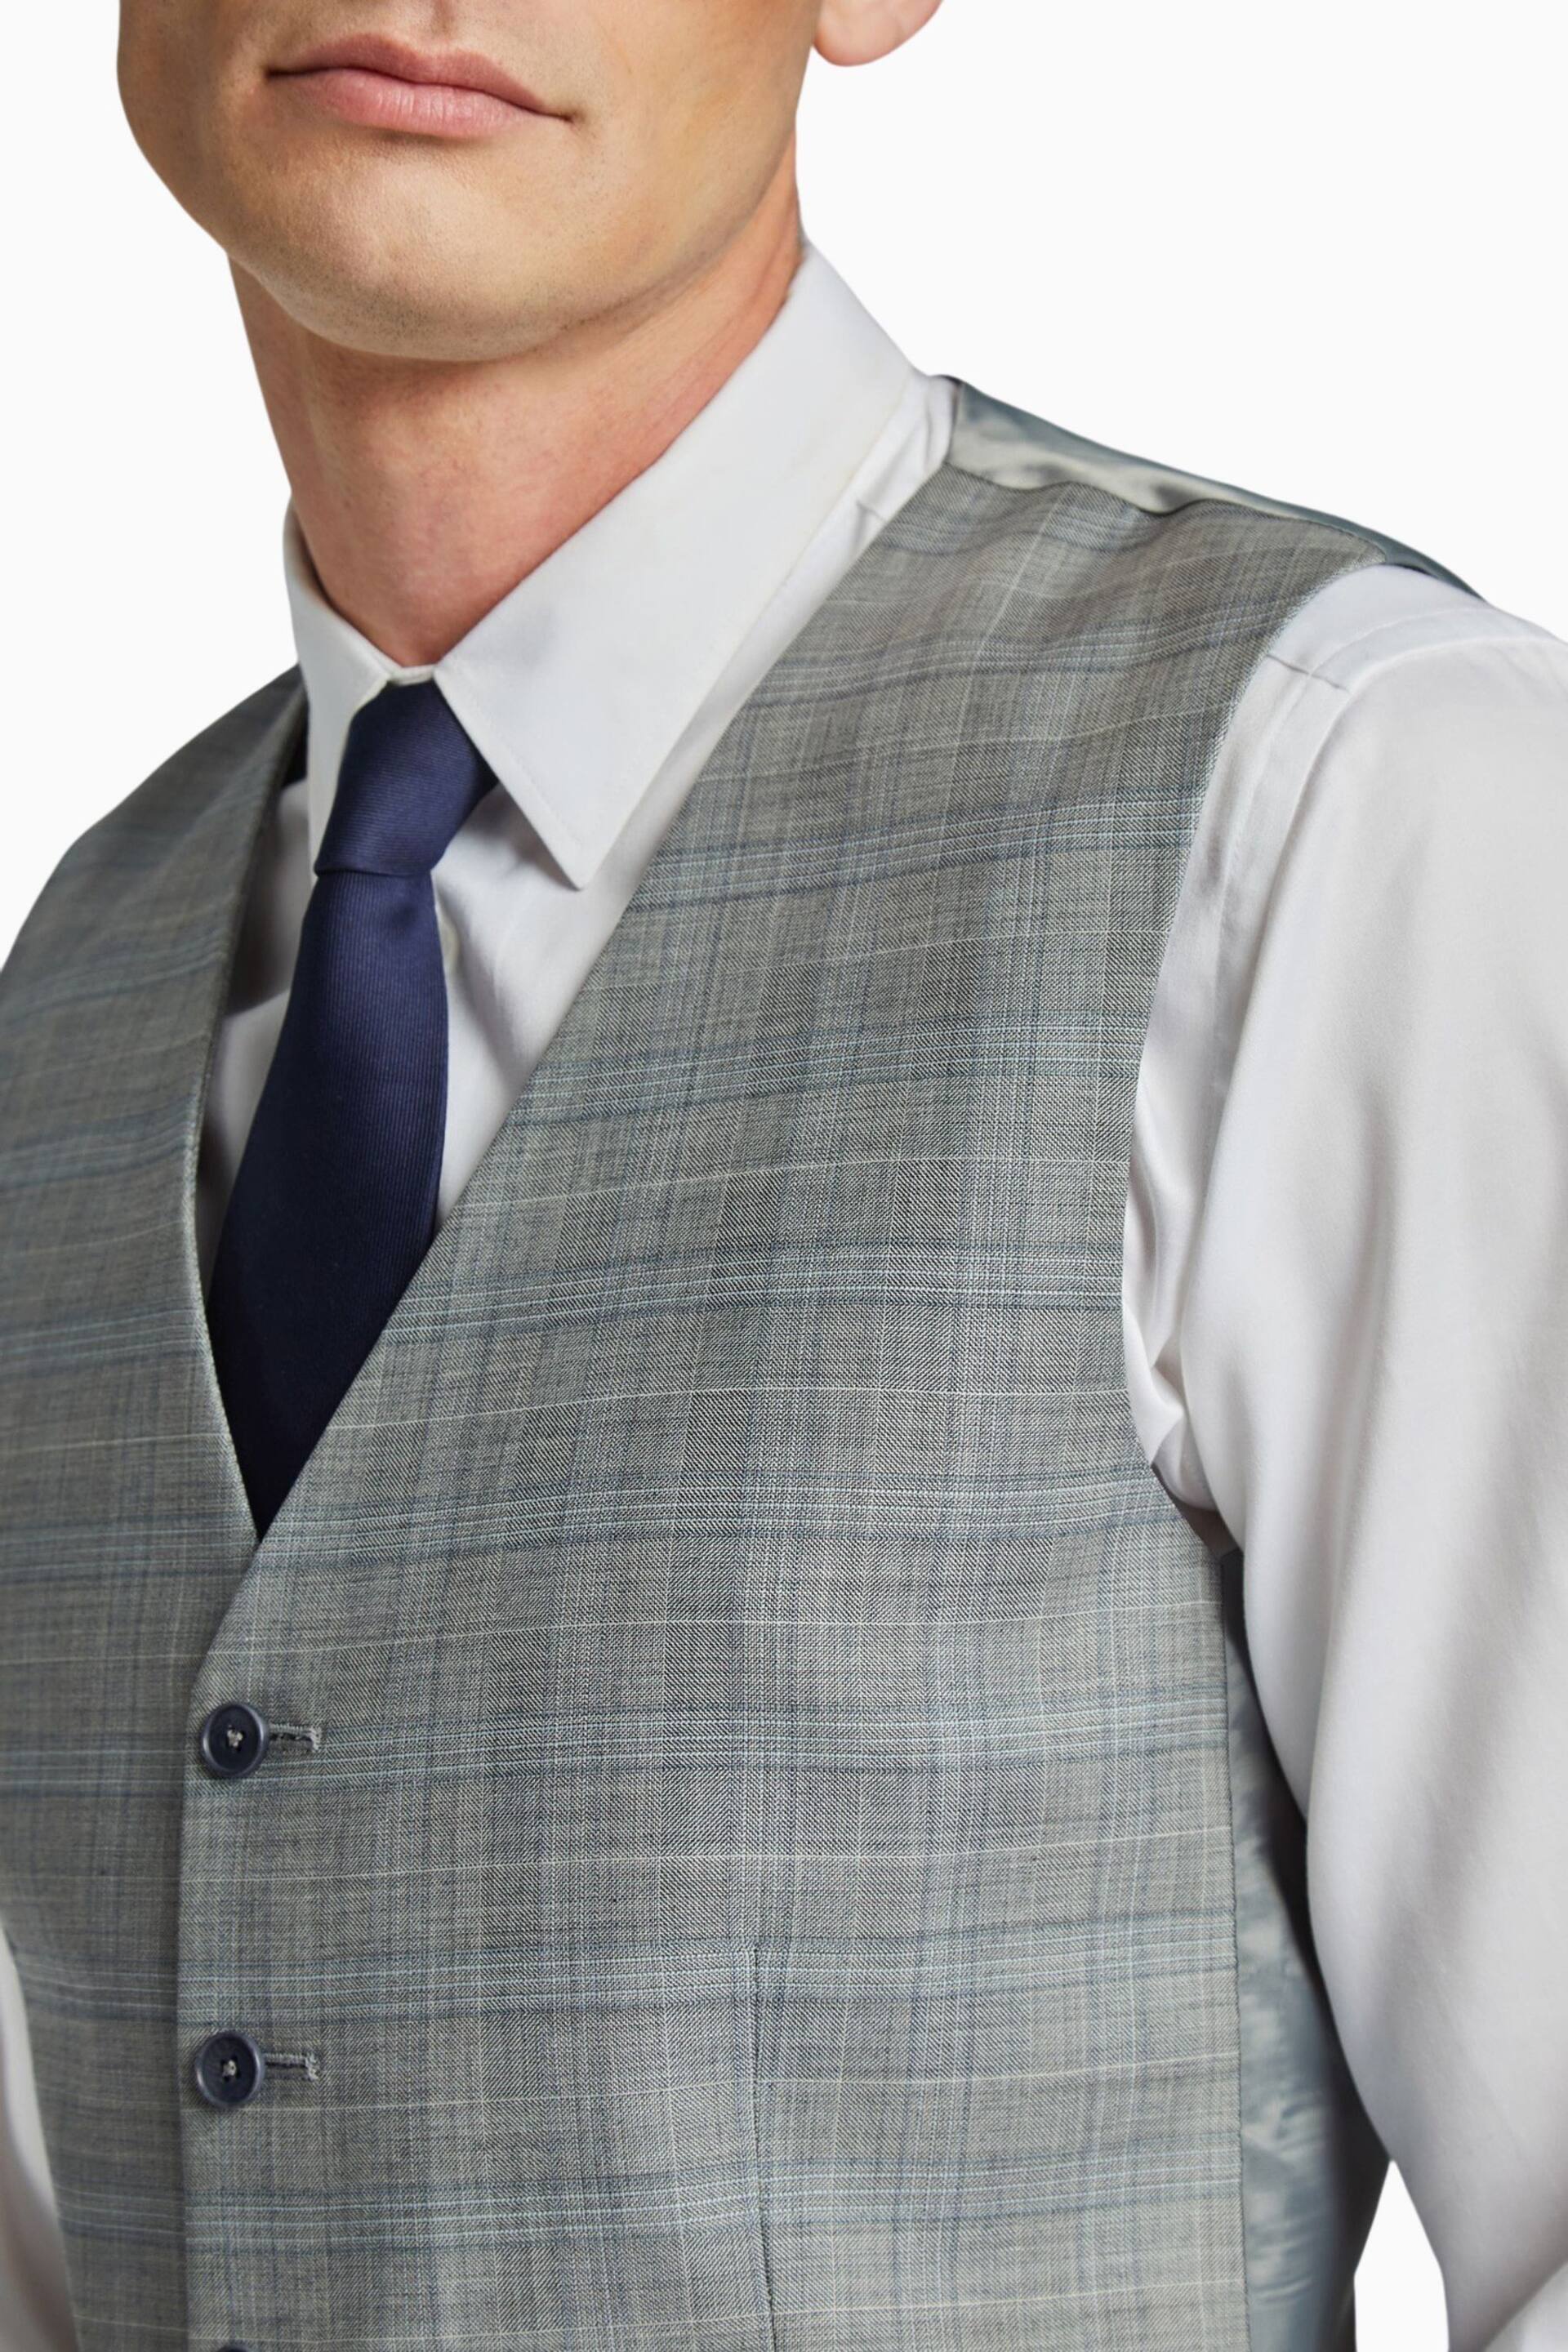 Ted Baker Tailoring Grey Prince of Wales Check Waistcoat - Image 2 of 2